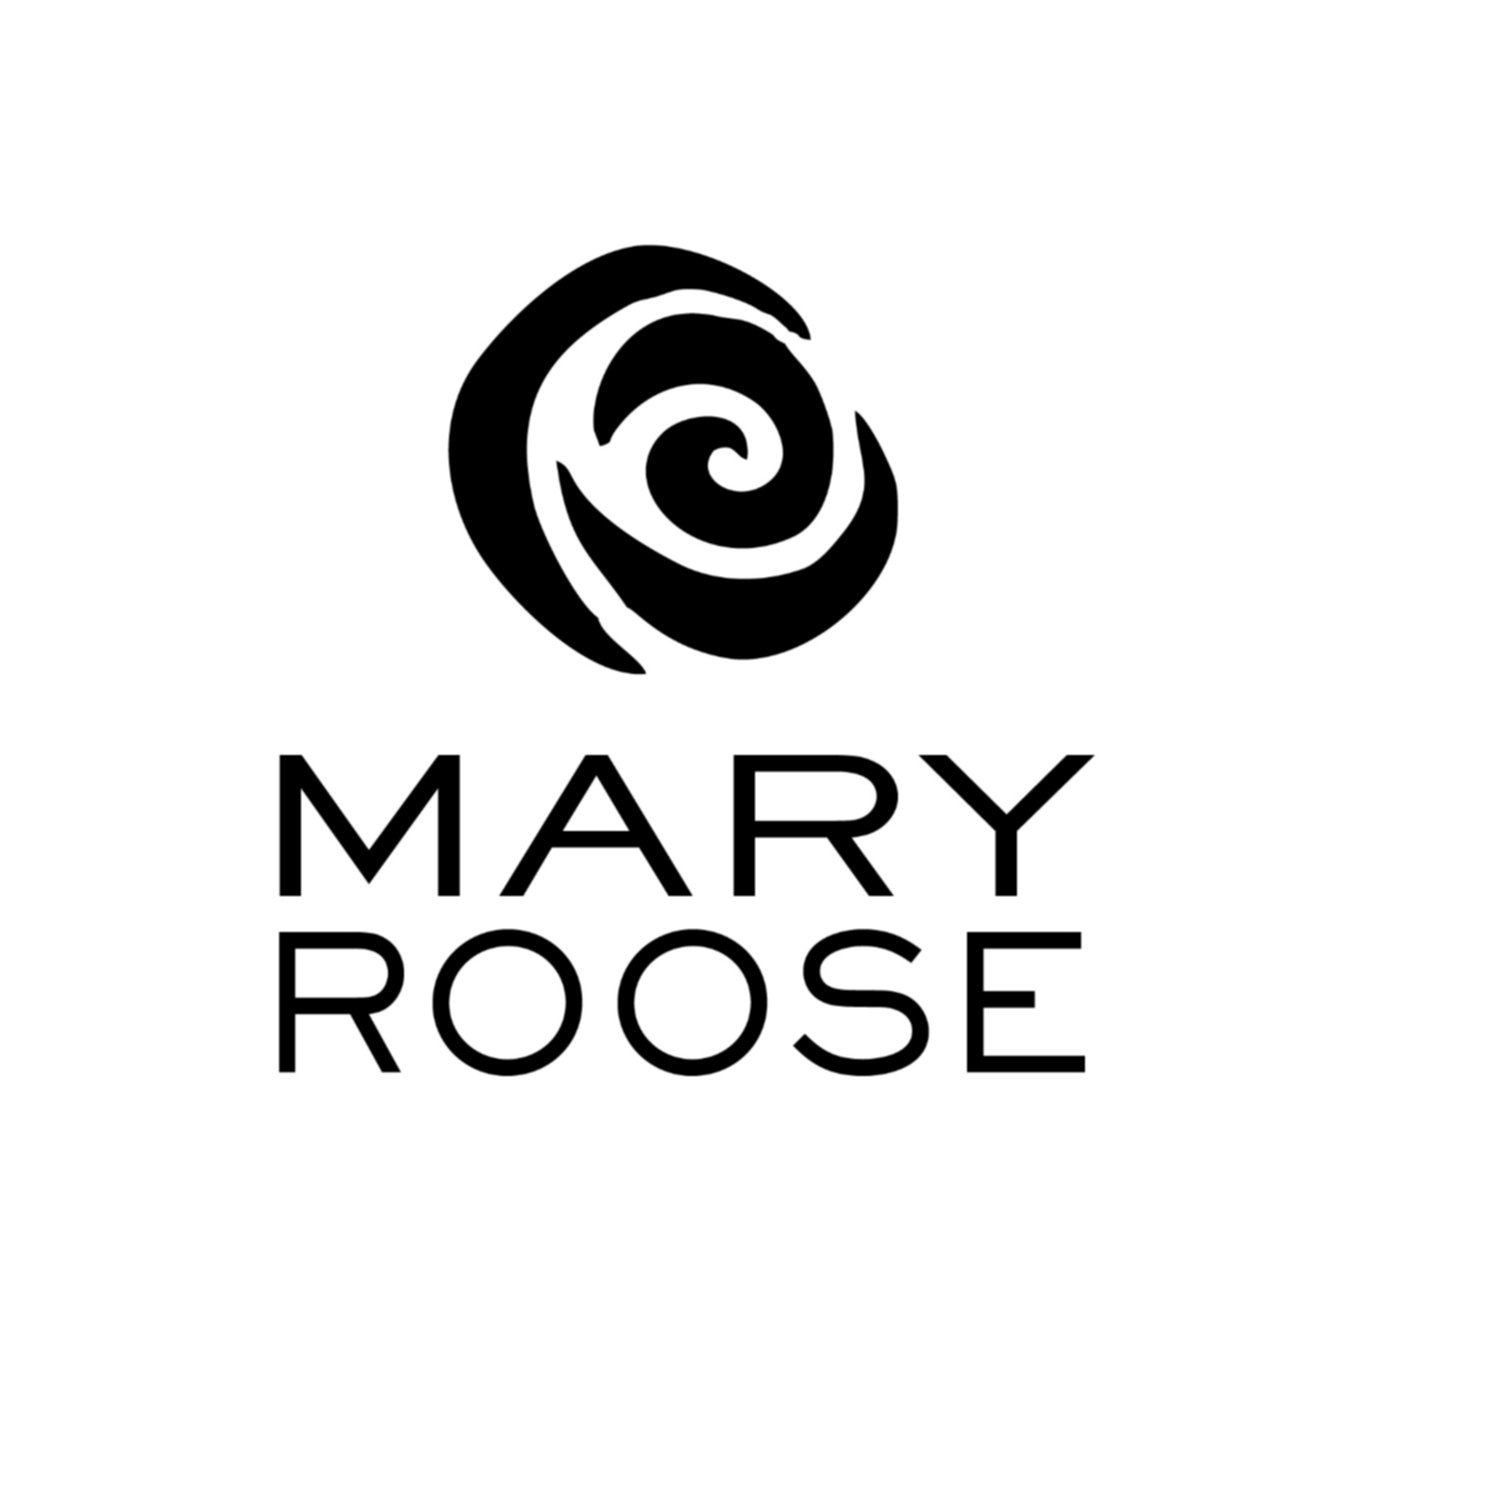 MARY ROOSE